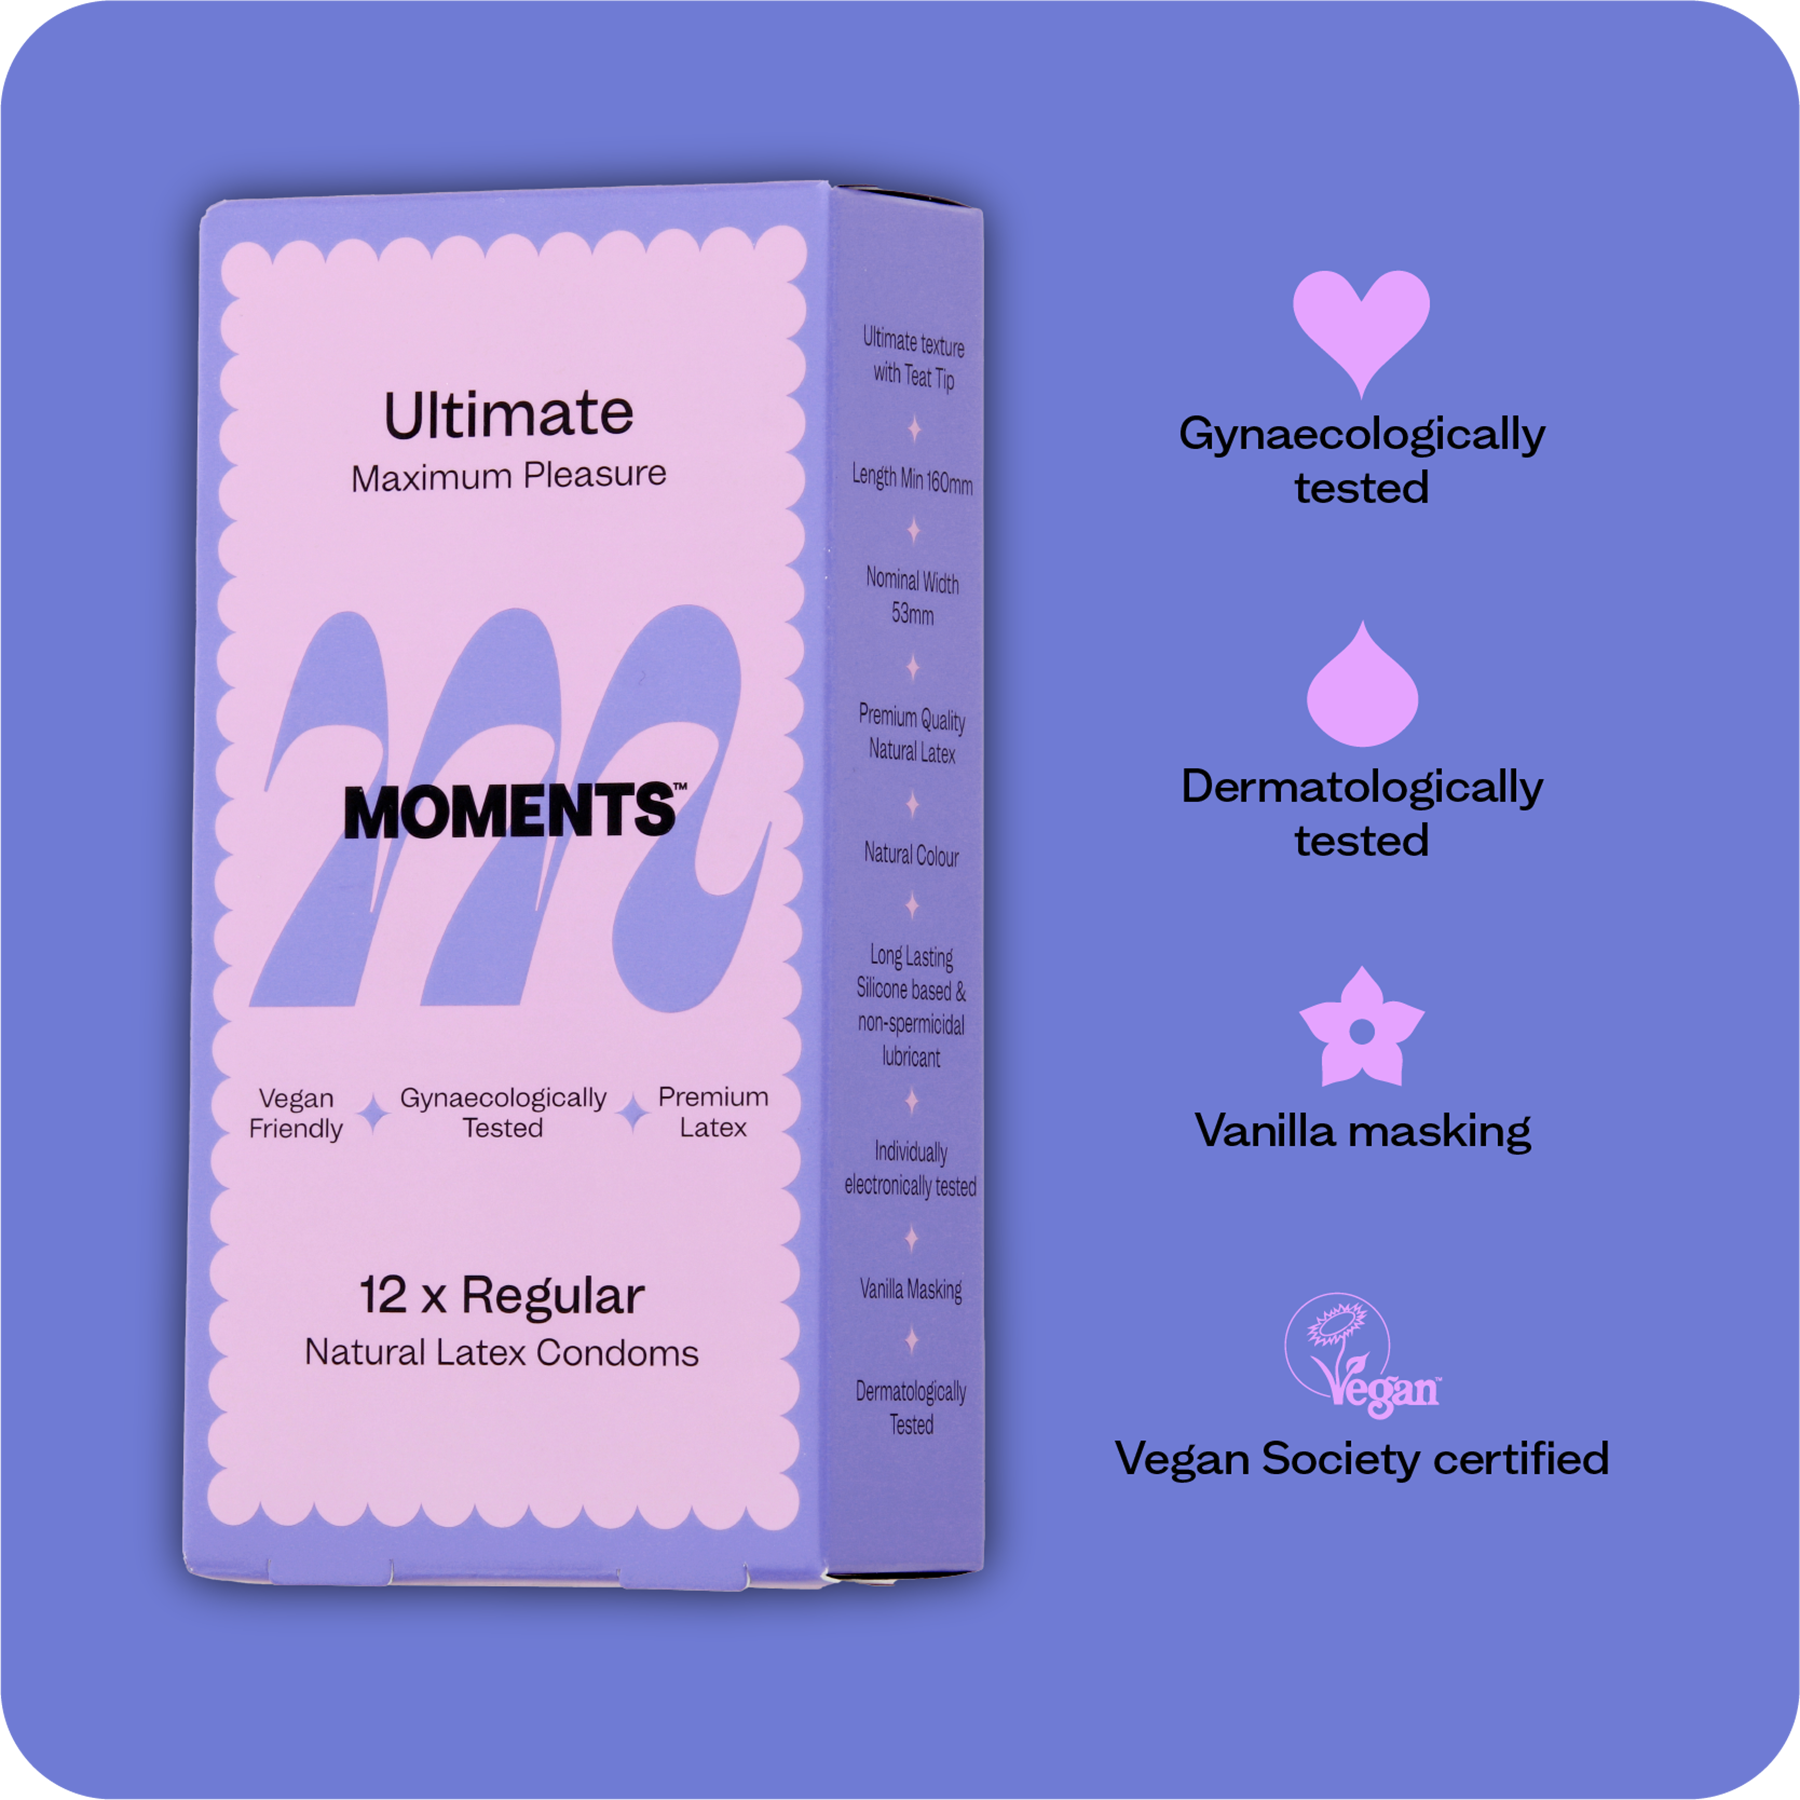 Frontal view of Moments Ultimate condoms showcasing the brand label